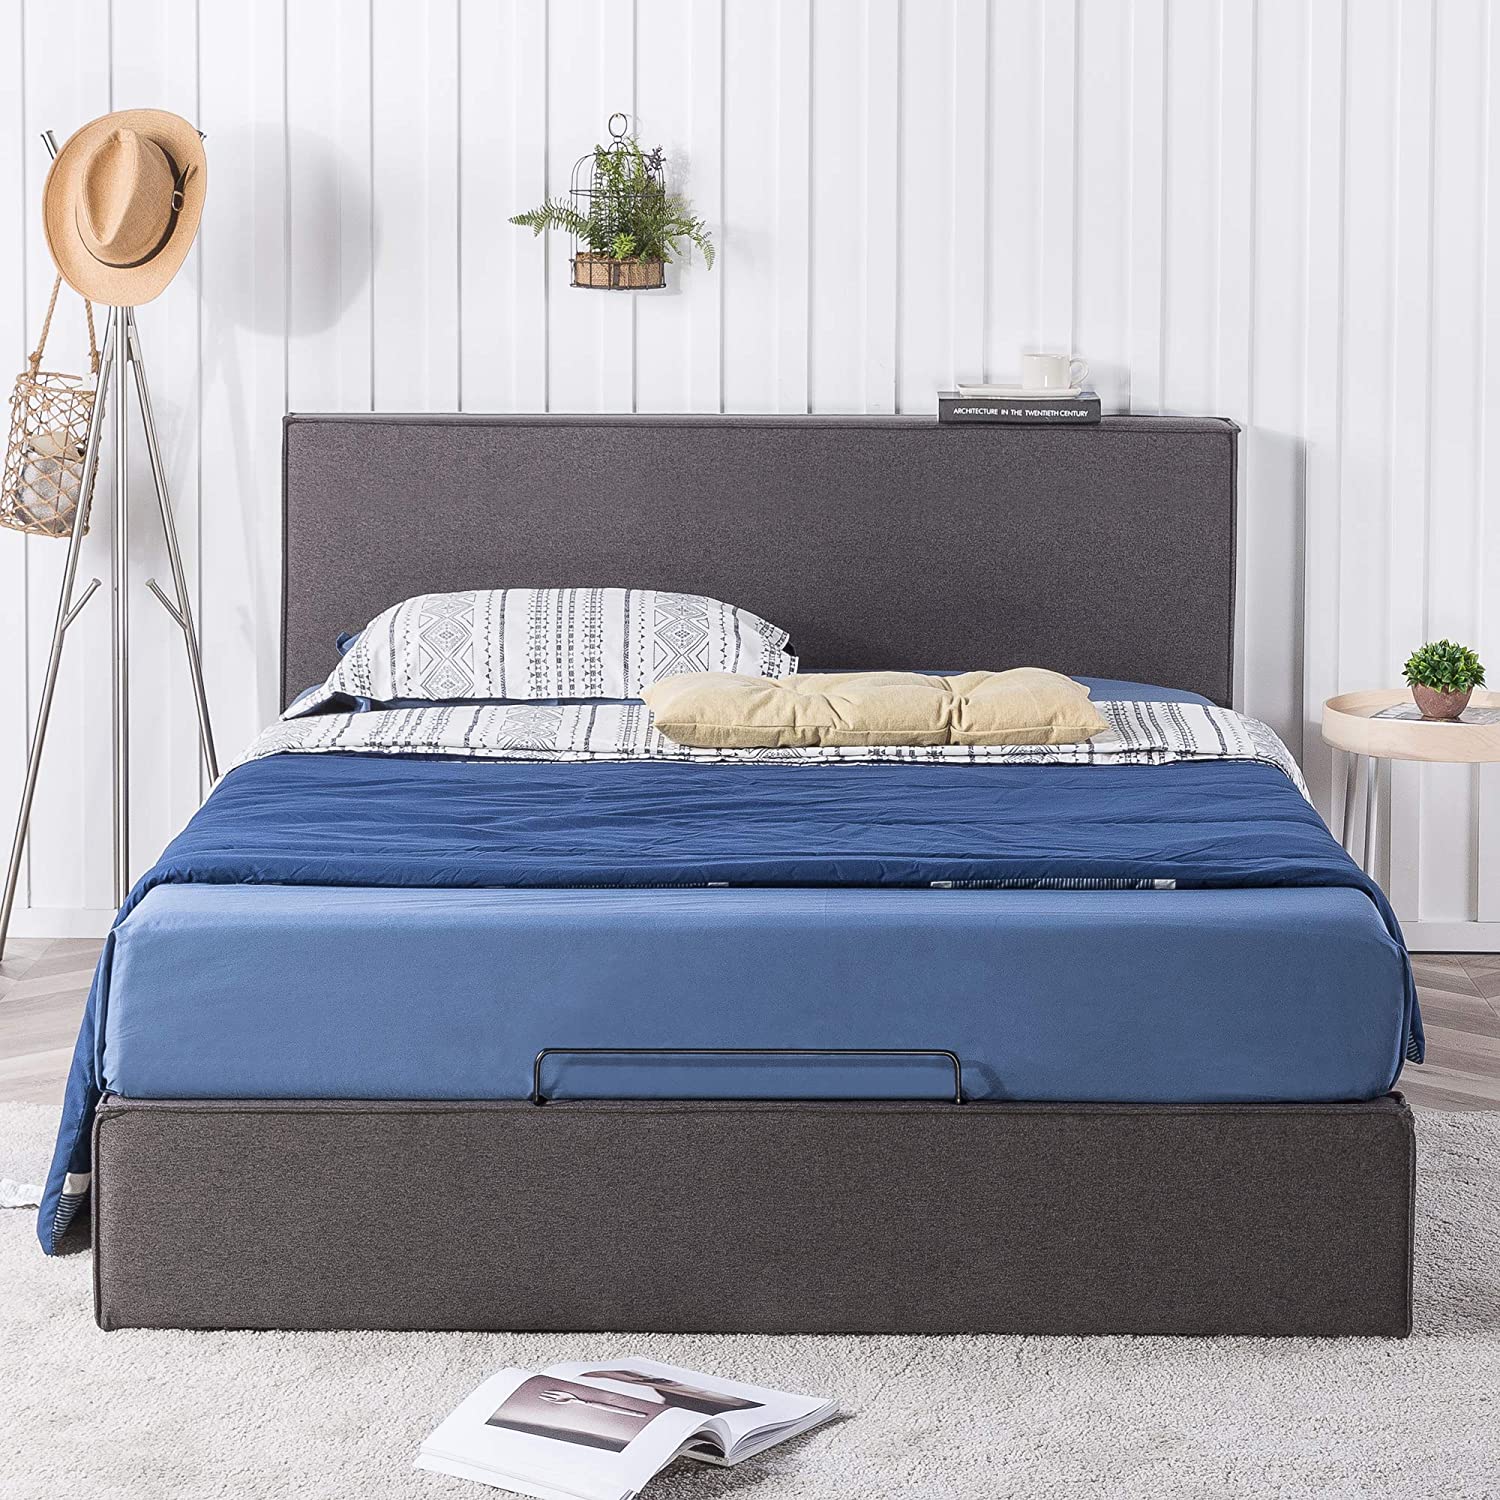 ZINUS Finley Upholstered Platform Bed Frame with Lifting Storage, Queen